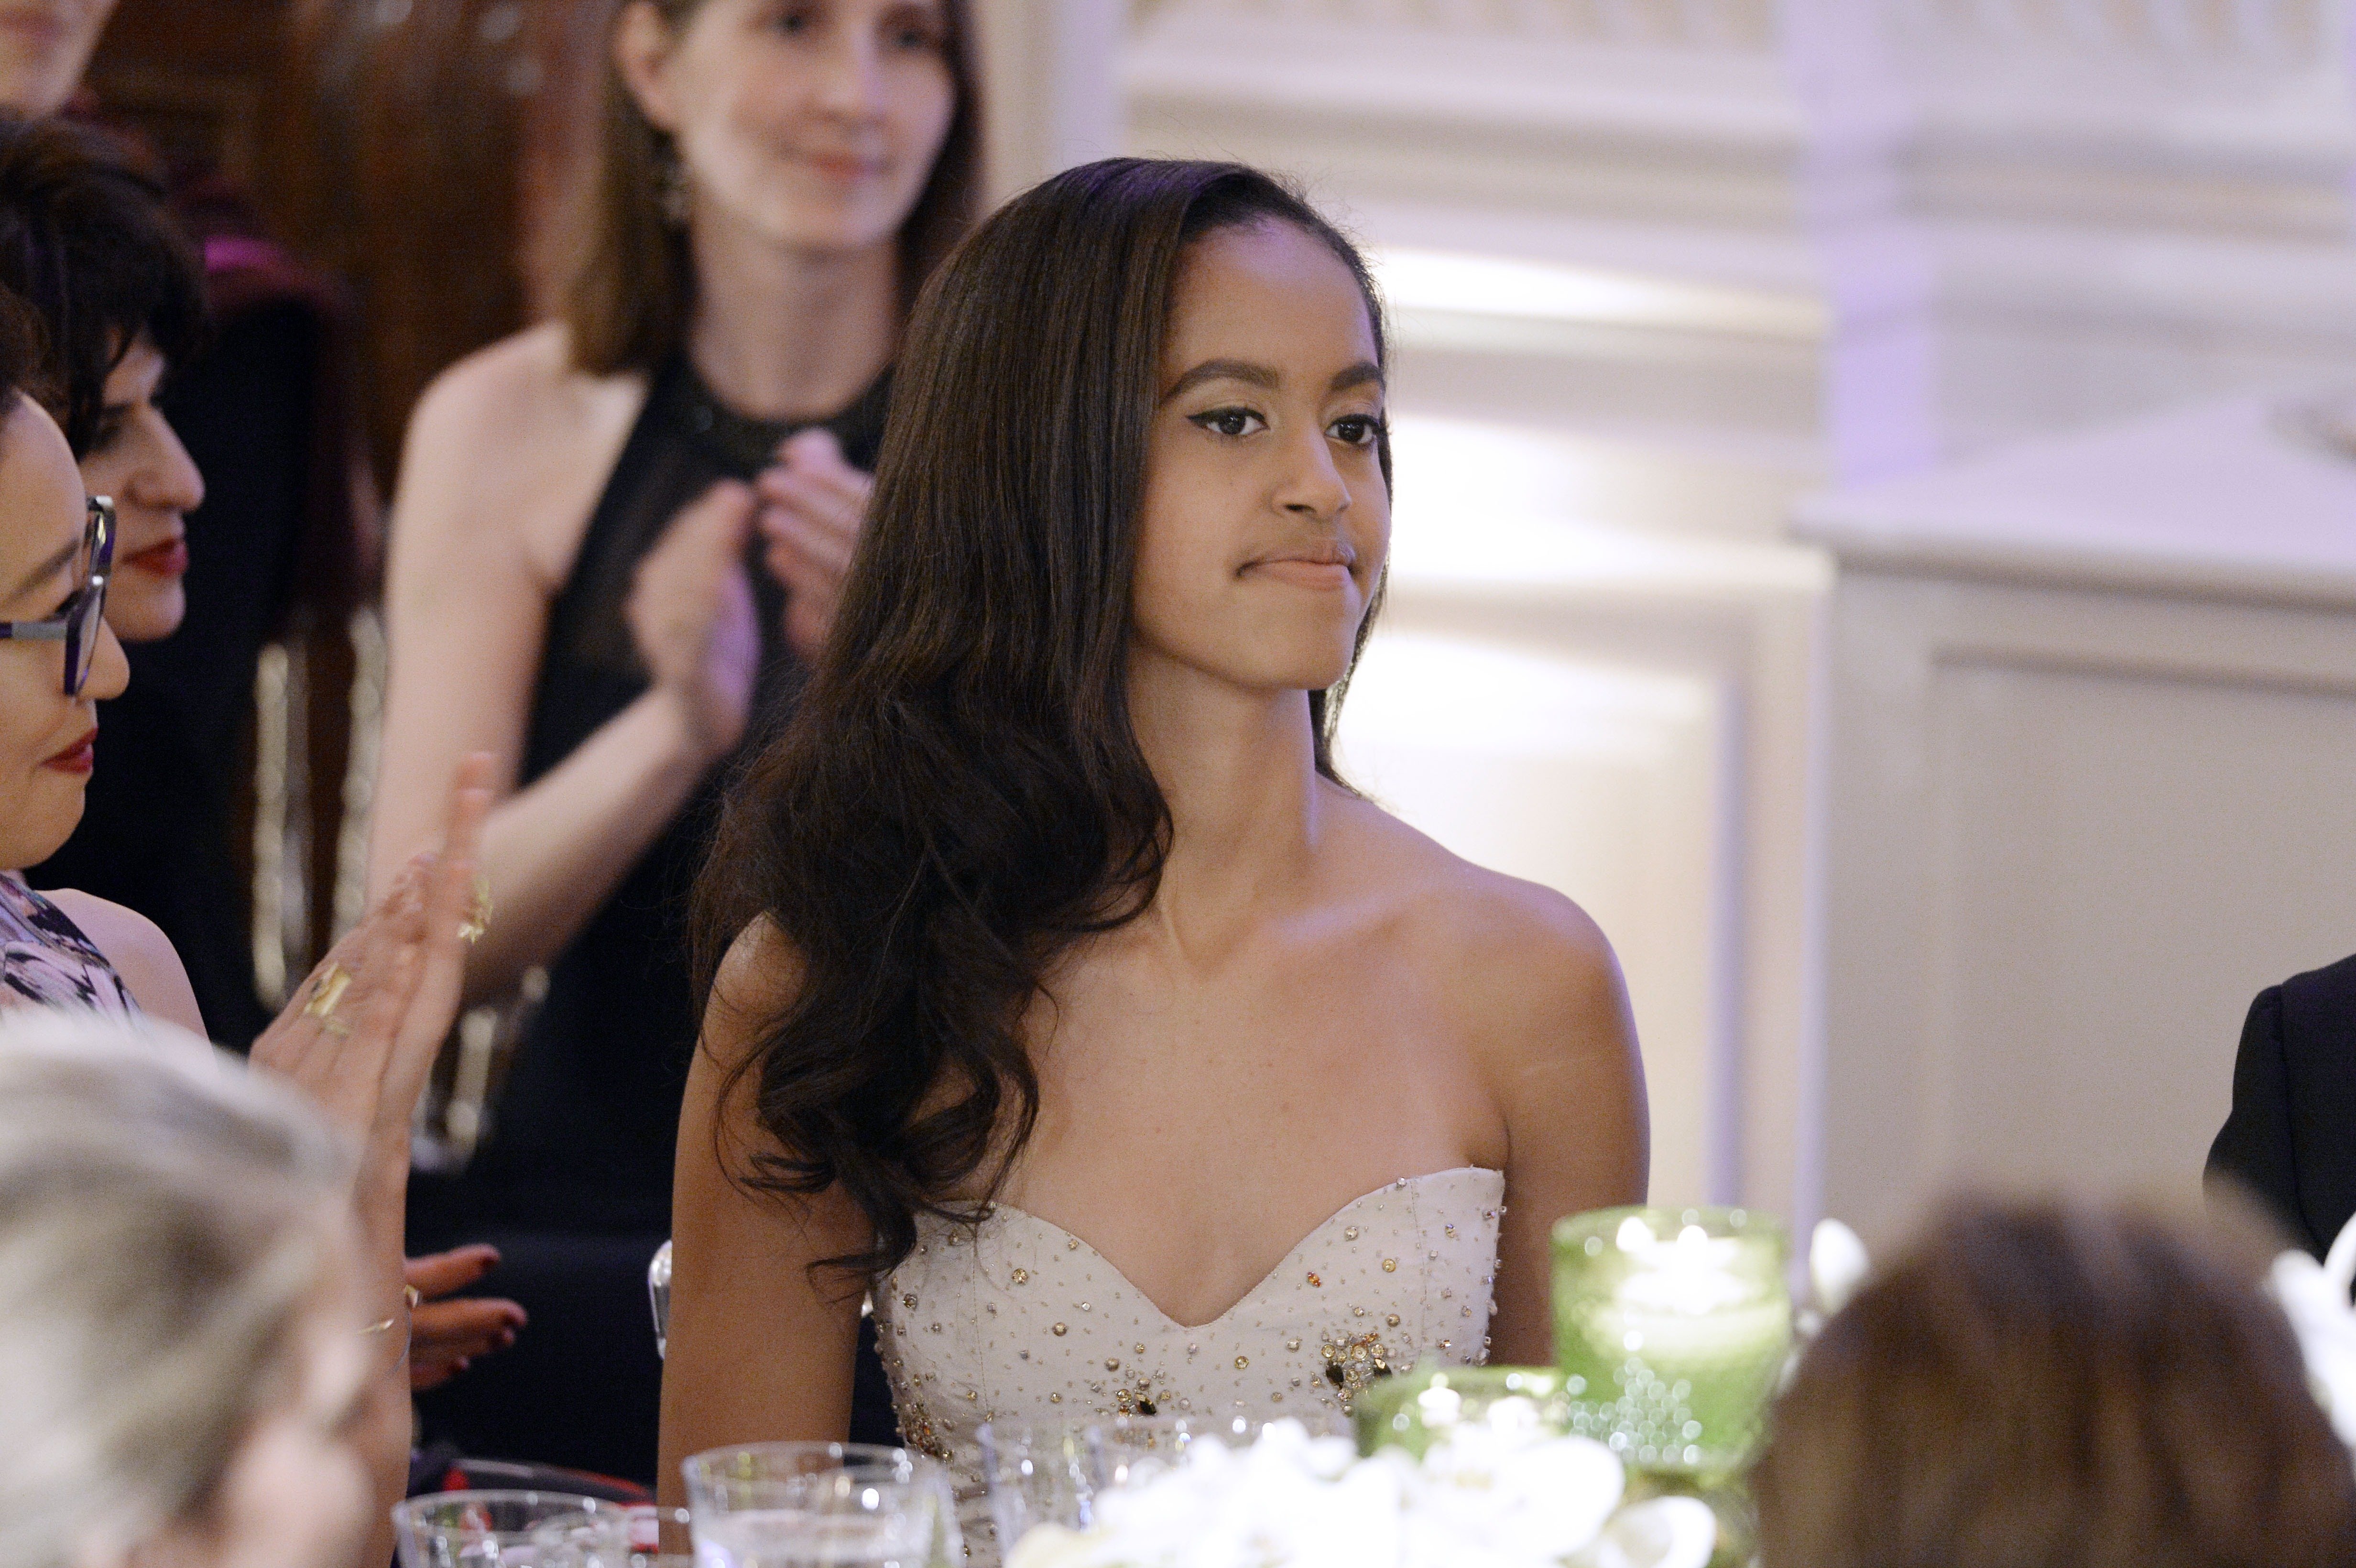 Malia Obama at a White House State Dinner on March 10, 2016 in Washington, D.C. | Photo: Getty Images.